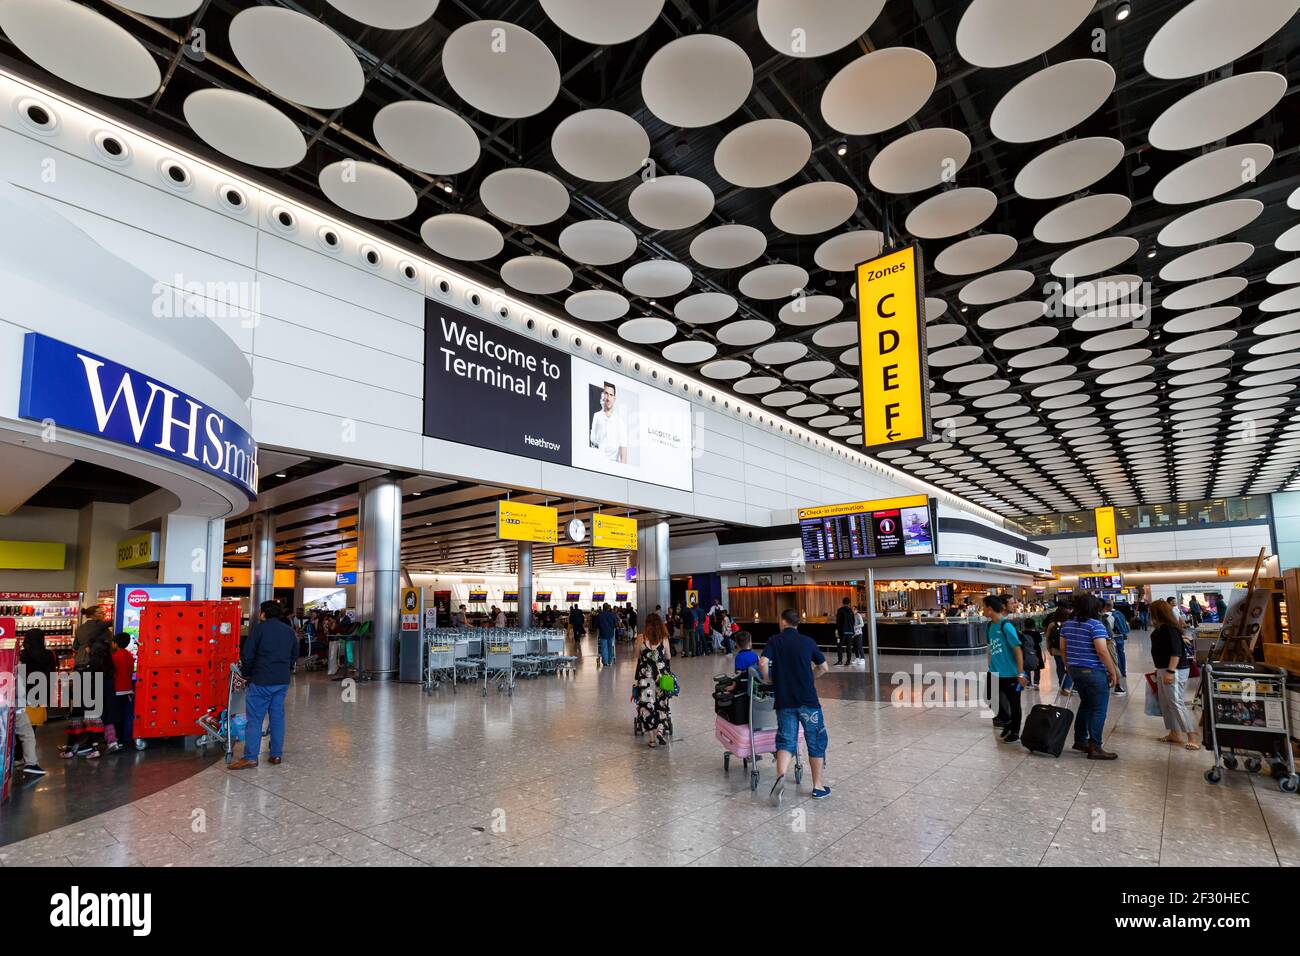 London, United Kingdom - July 31, 2018: Terminal 4 at London Heathrow airport (LHR) in the United Kingdom. Stock Photo